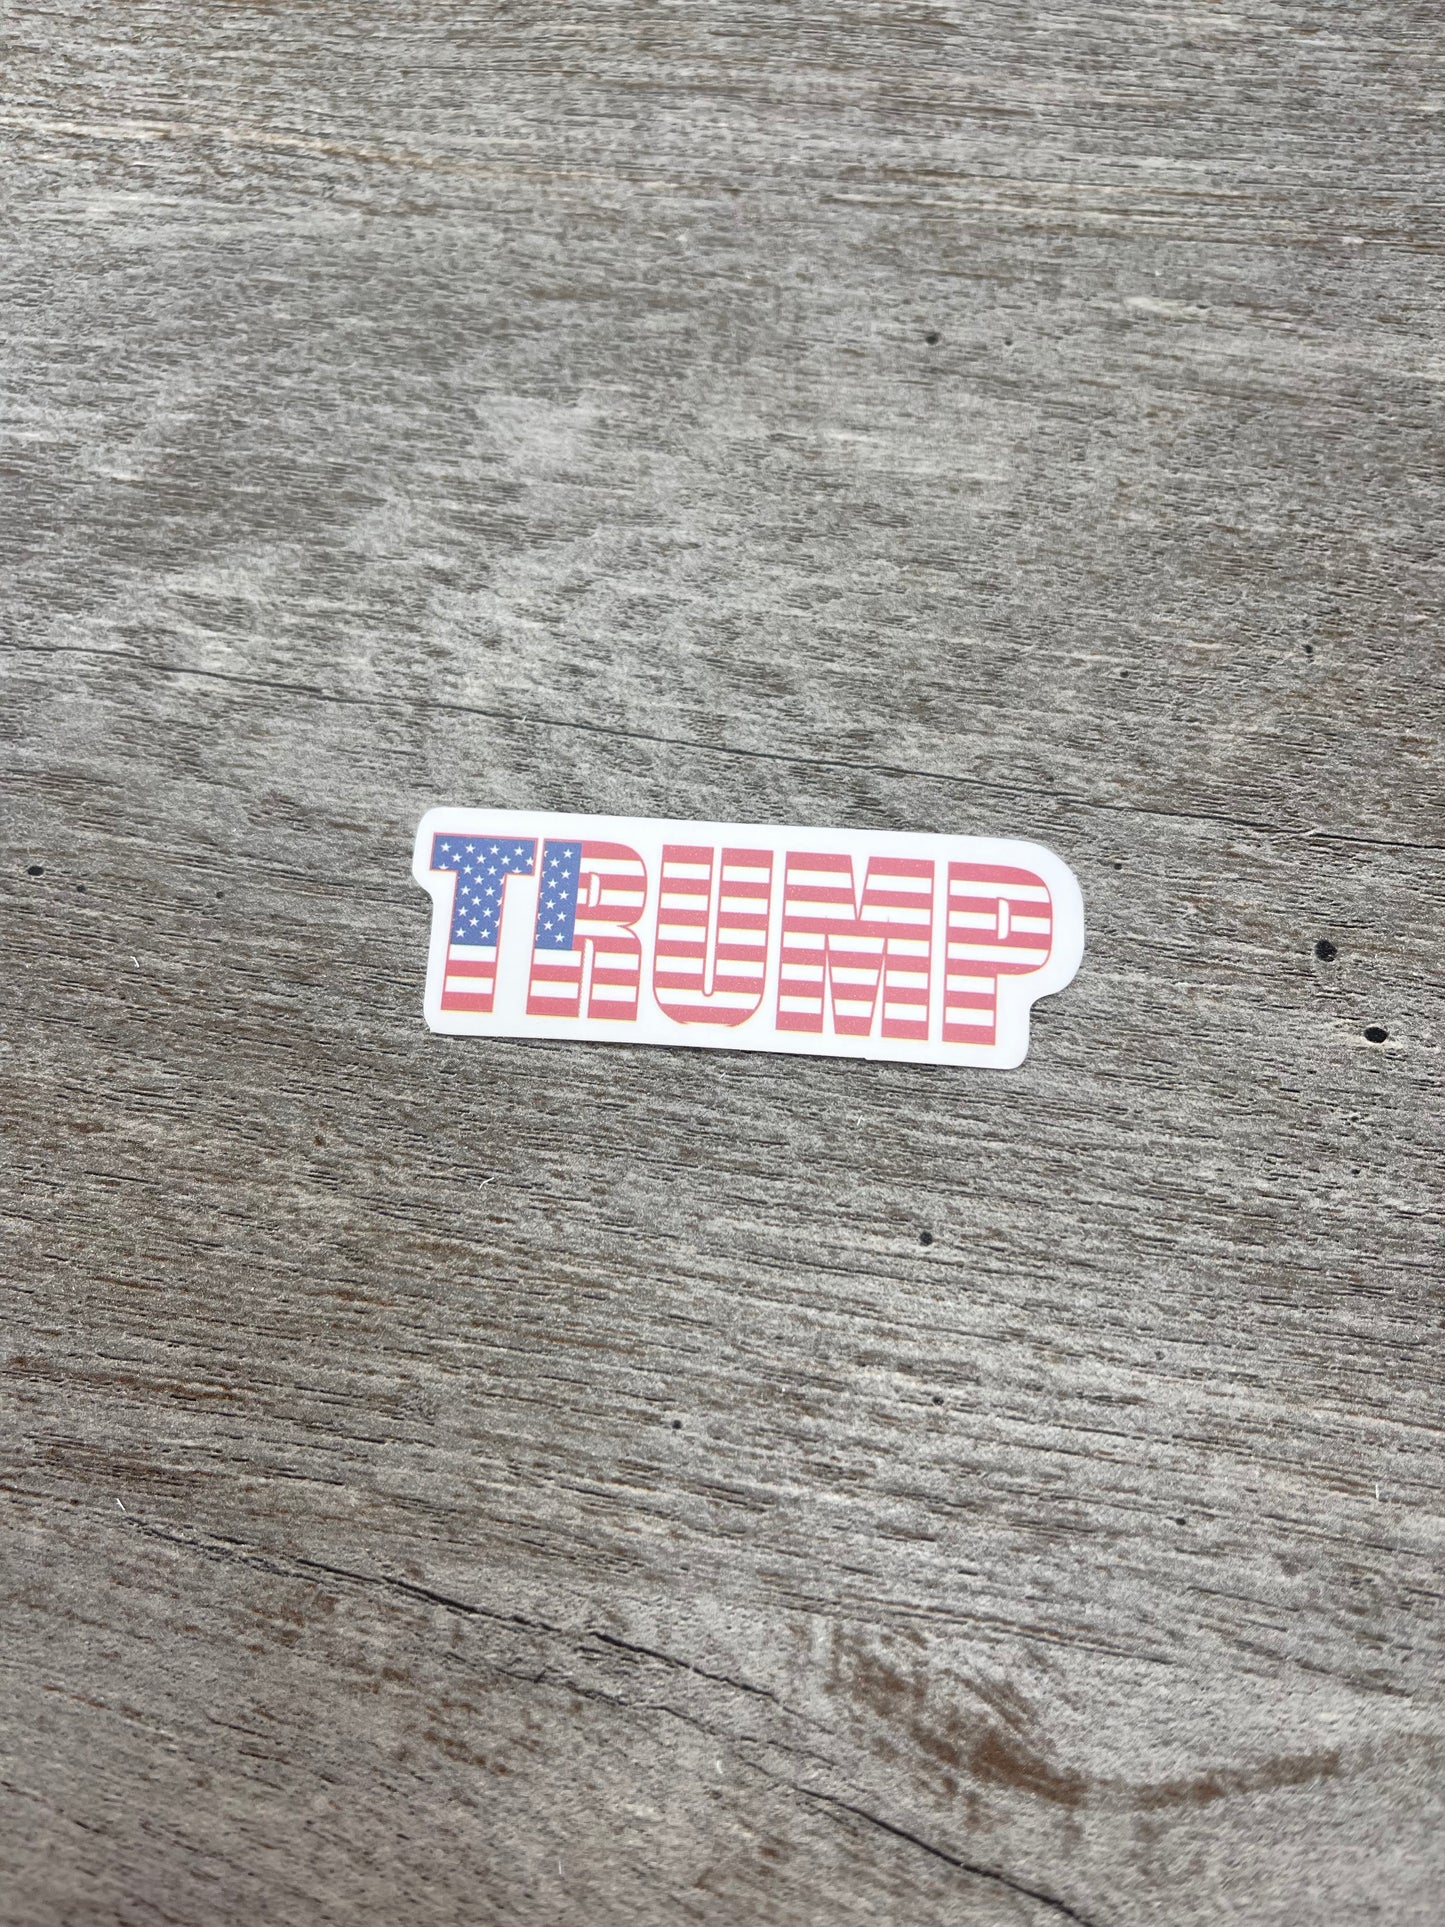 Trump Stickers {Multiple Styles Available}